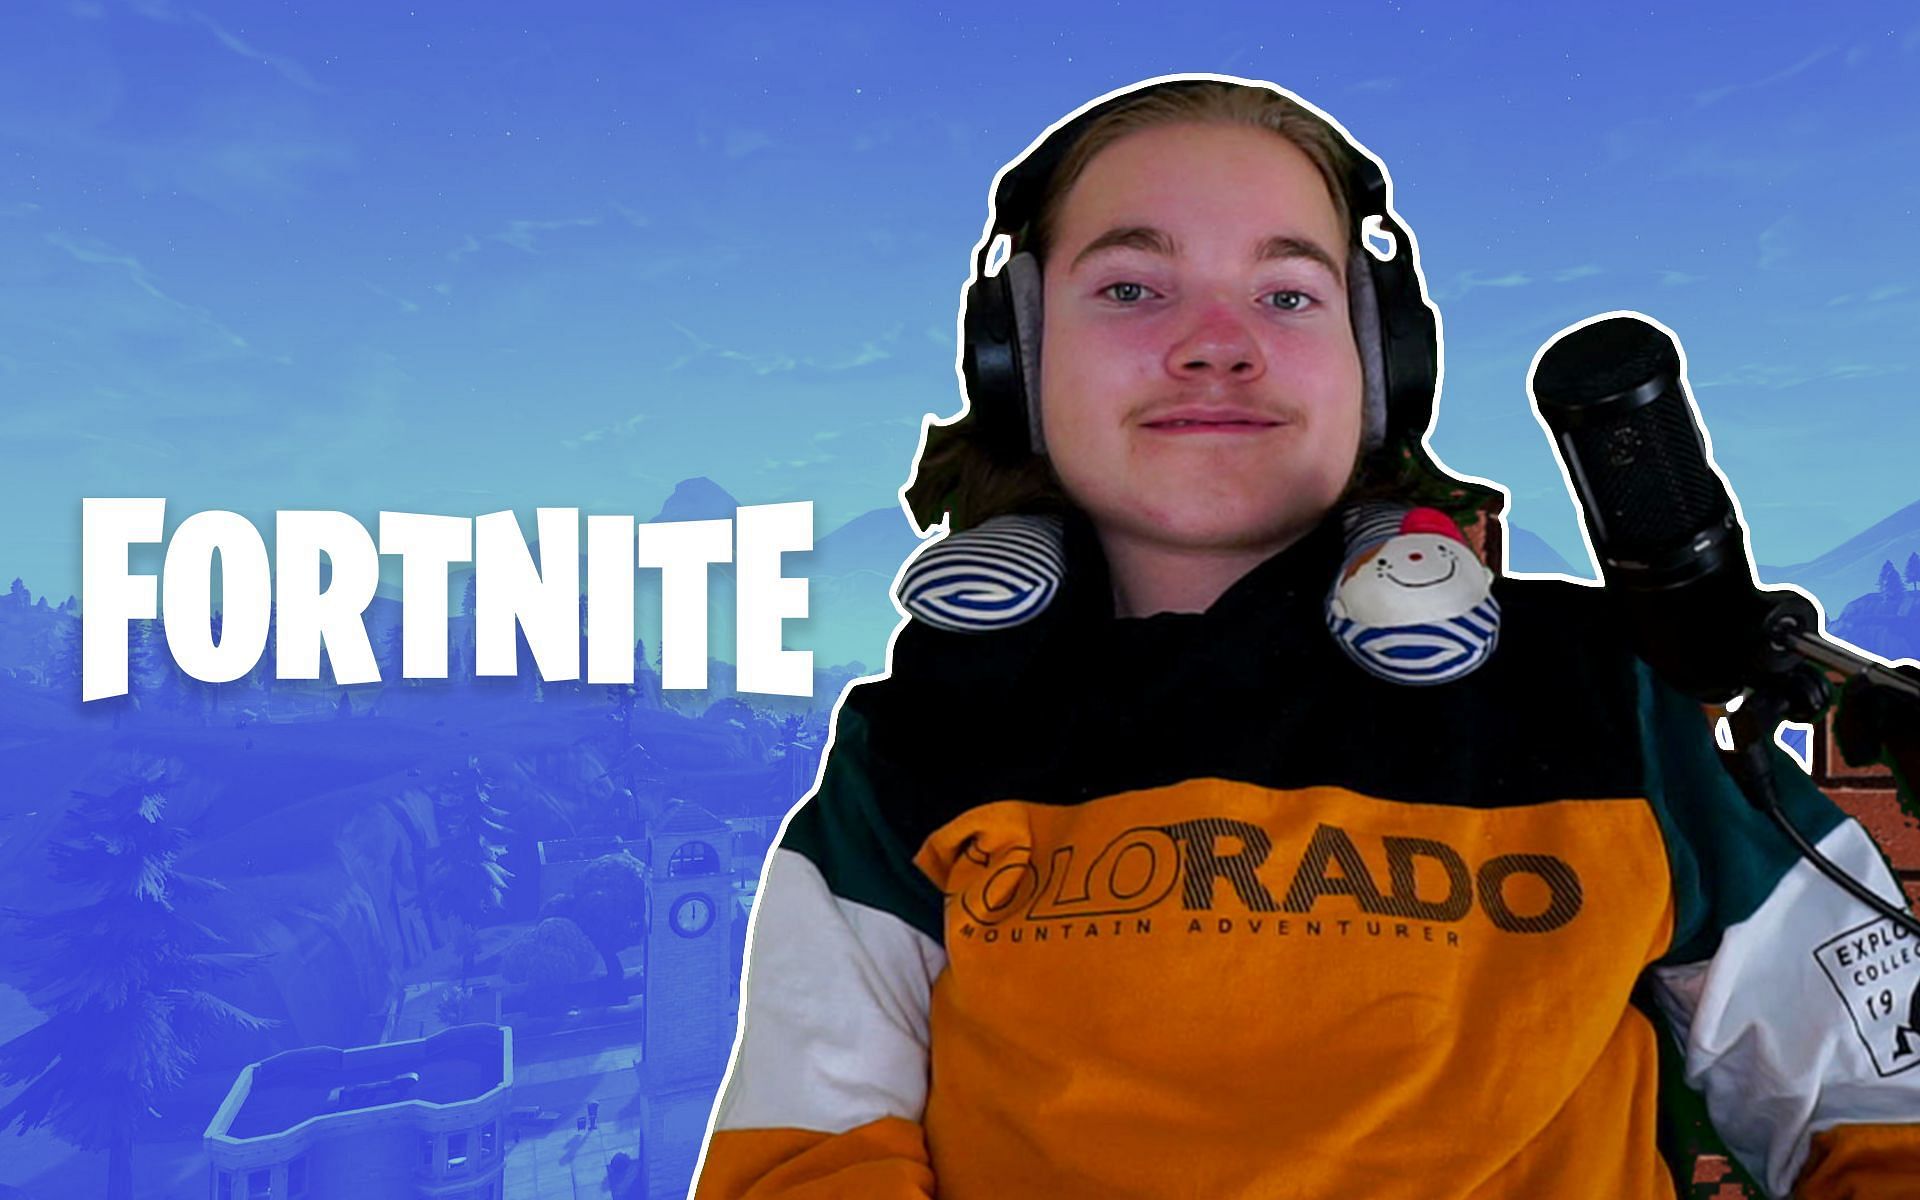 17-year-old Szymon defies the odds by playing Fortnite using his voice (Image via Sportskeeda)